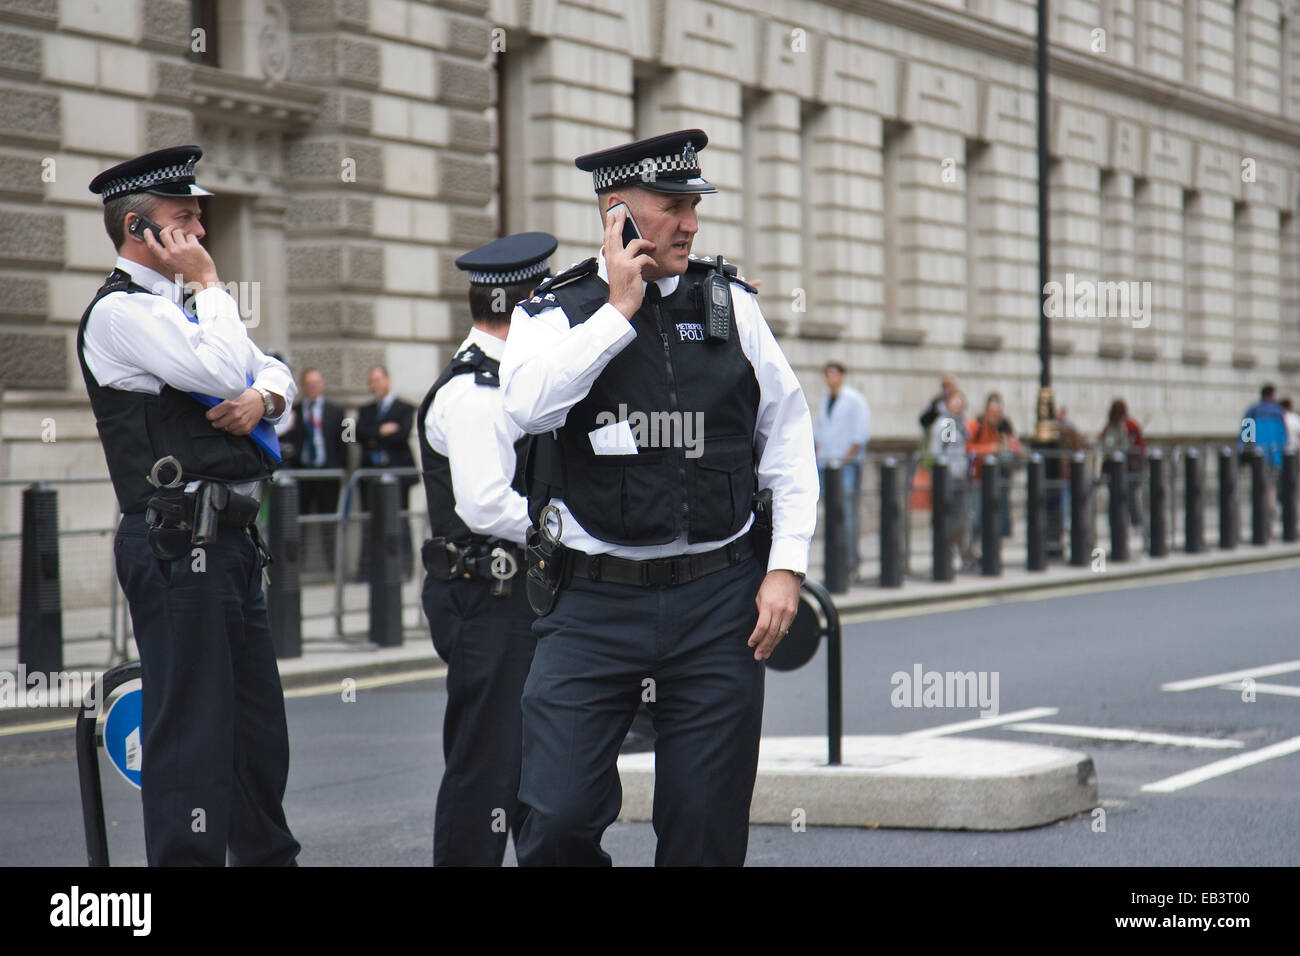 Metropolitan Police officers in the Whitehall area of London, England, UK Stock Photo